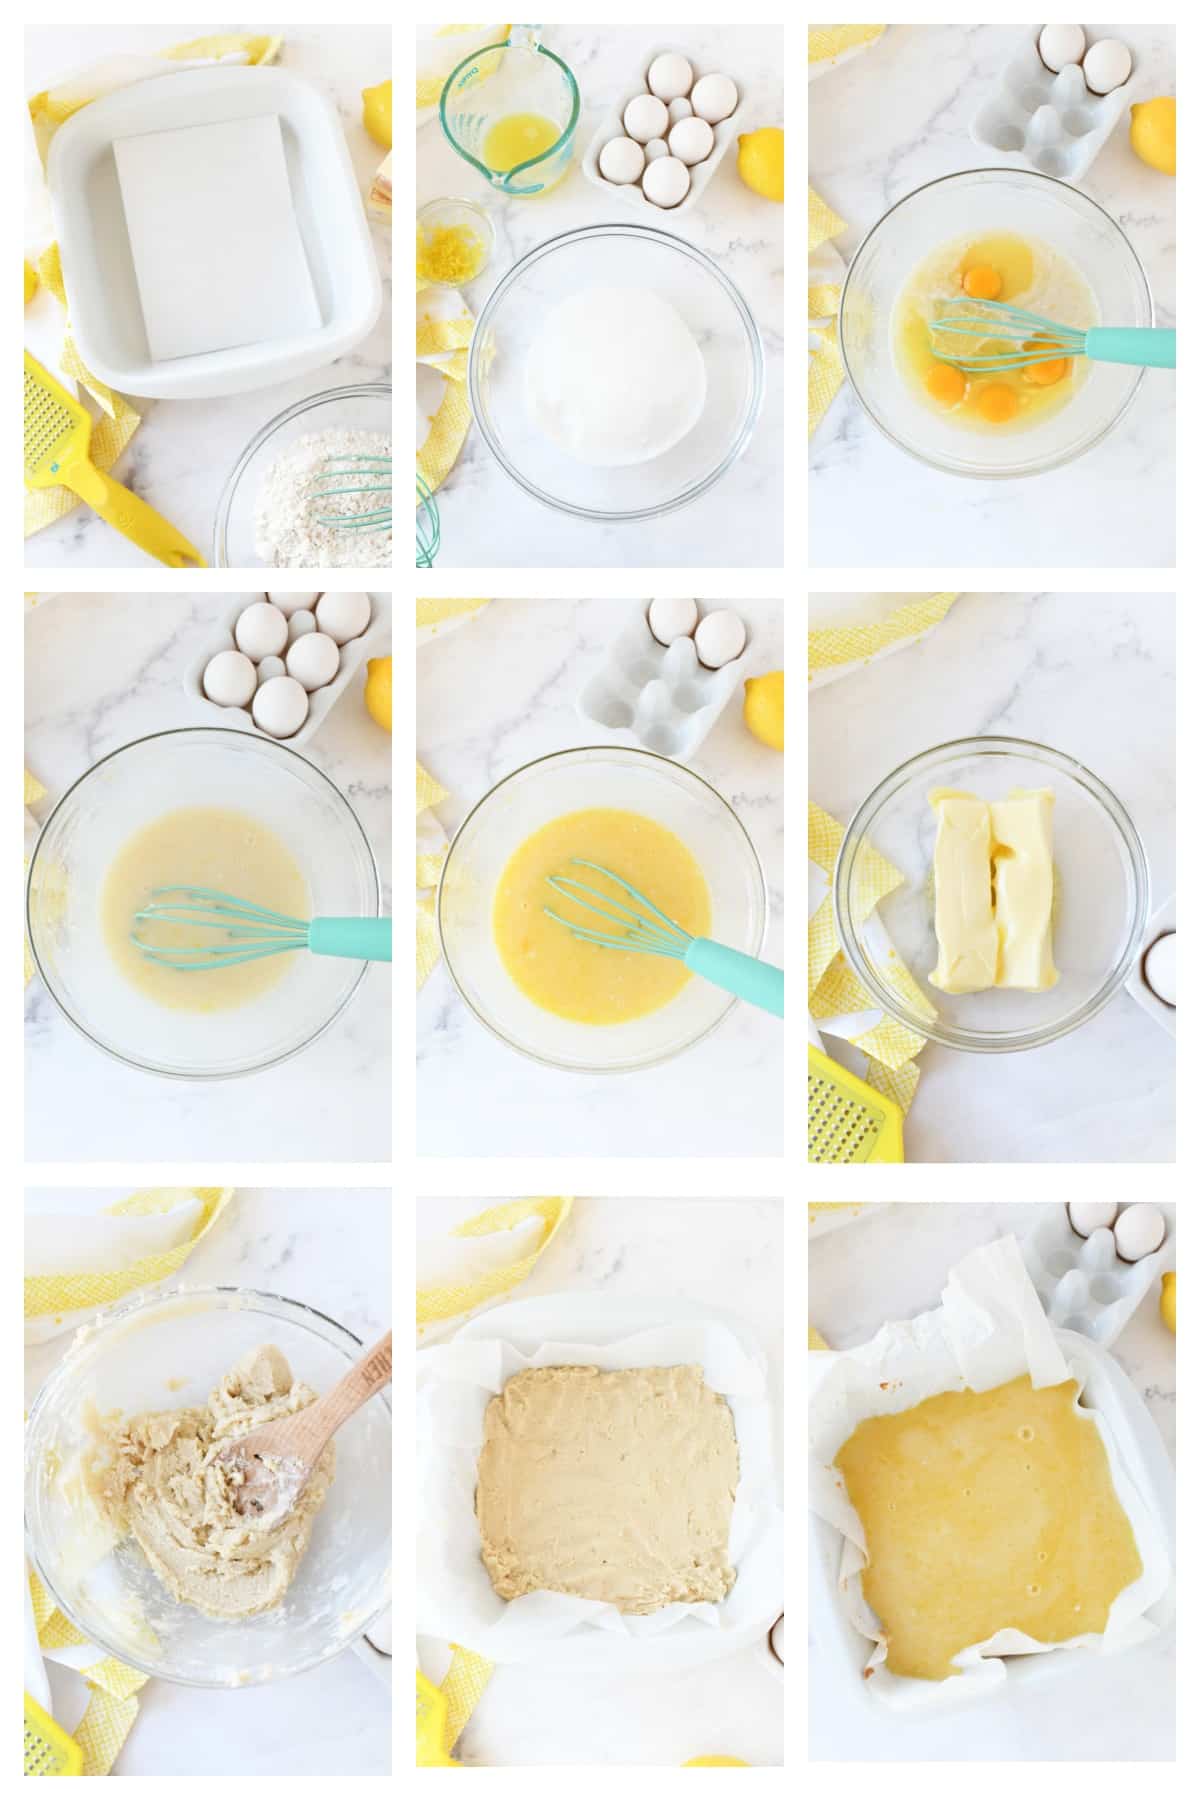 A nine block visual guide showing how to make lemon bars from scratch. 